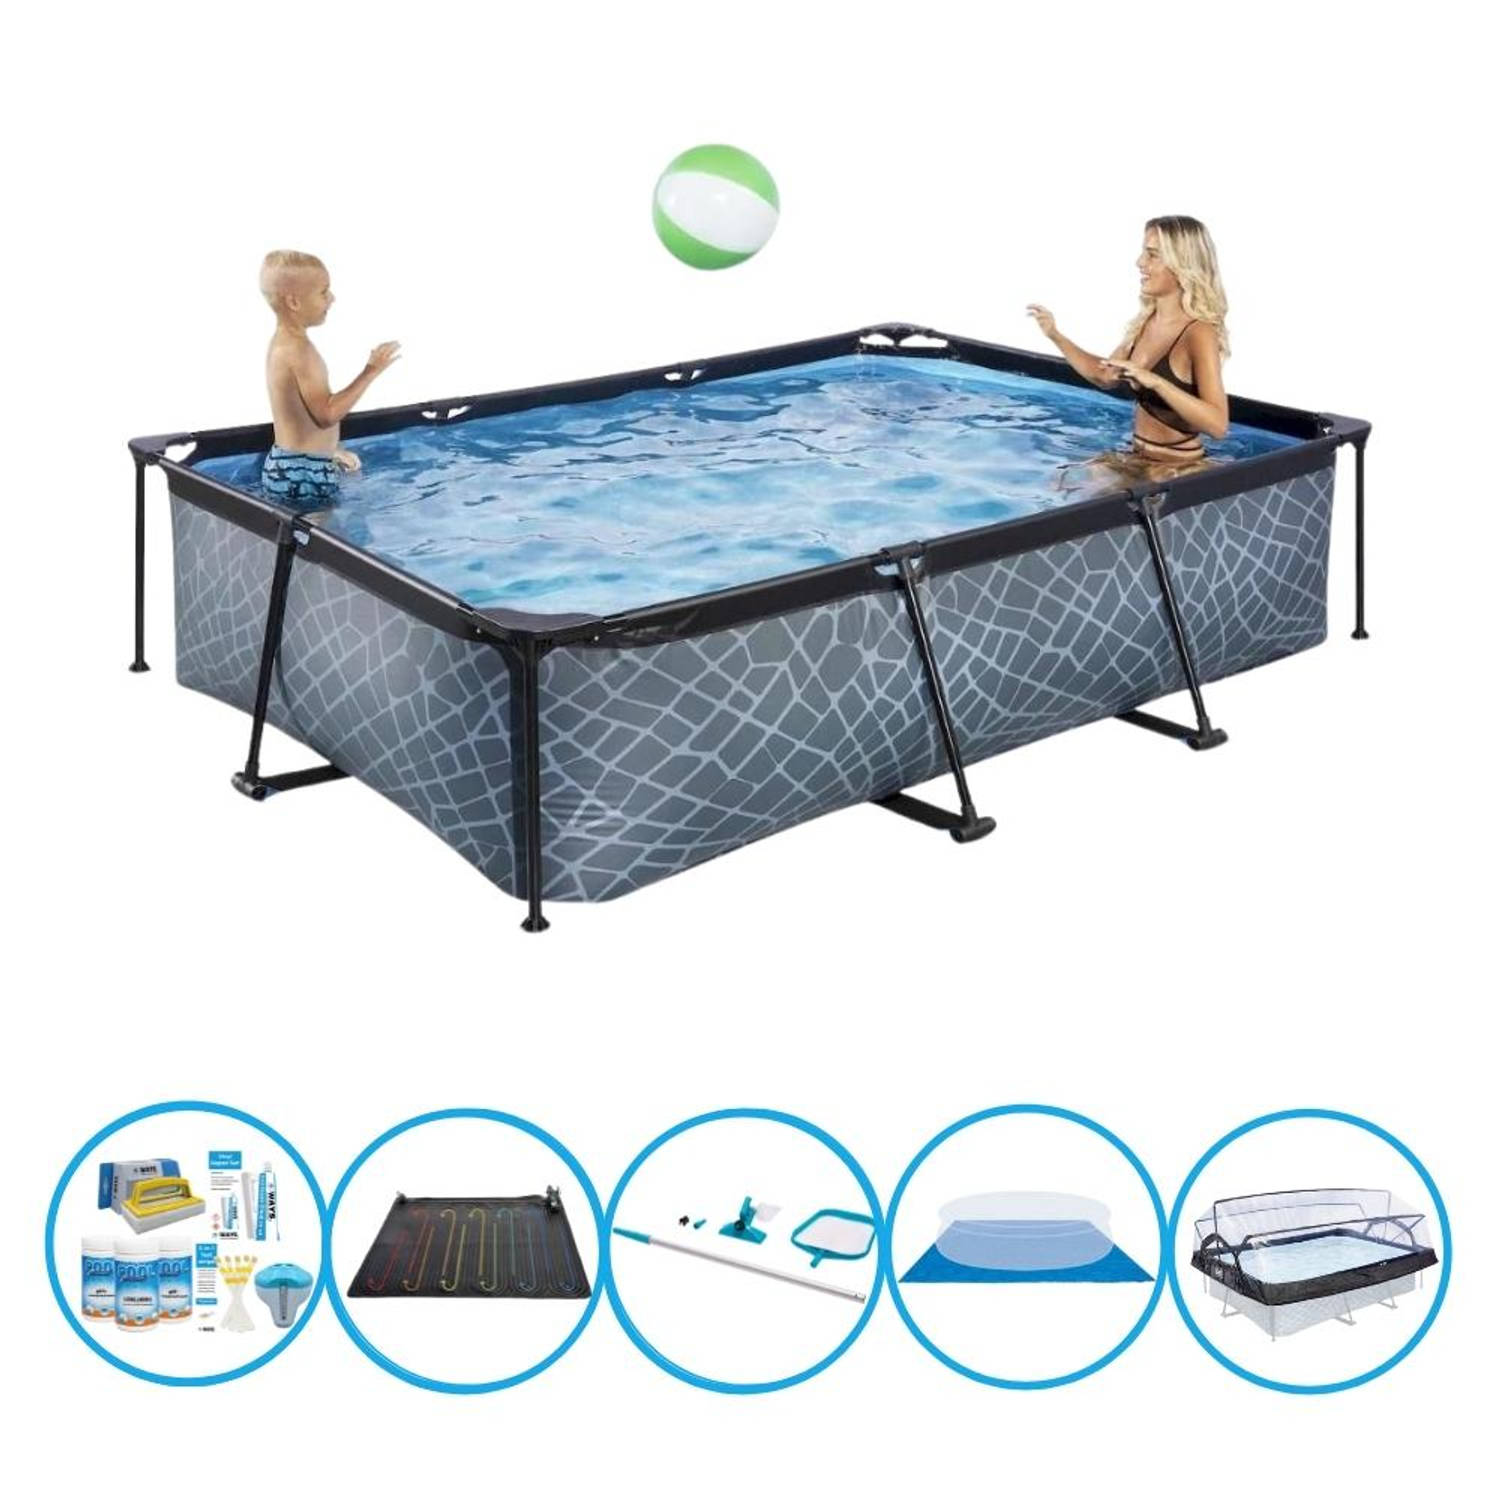 EXIT Zwembad Stone Grey - 300x200x65 cm - Frame Pool - Inclusief accessoires